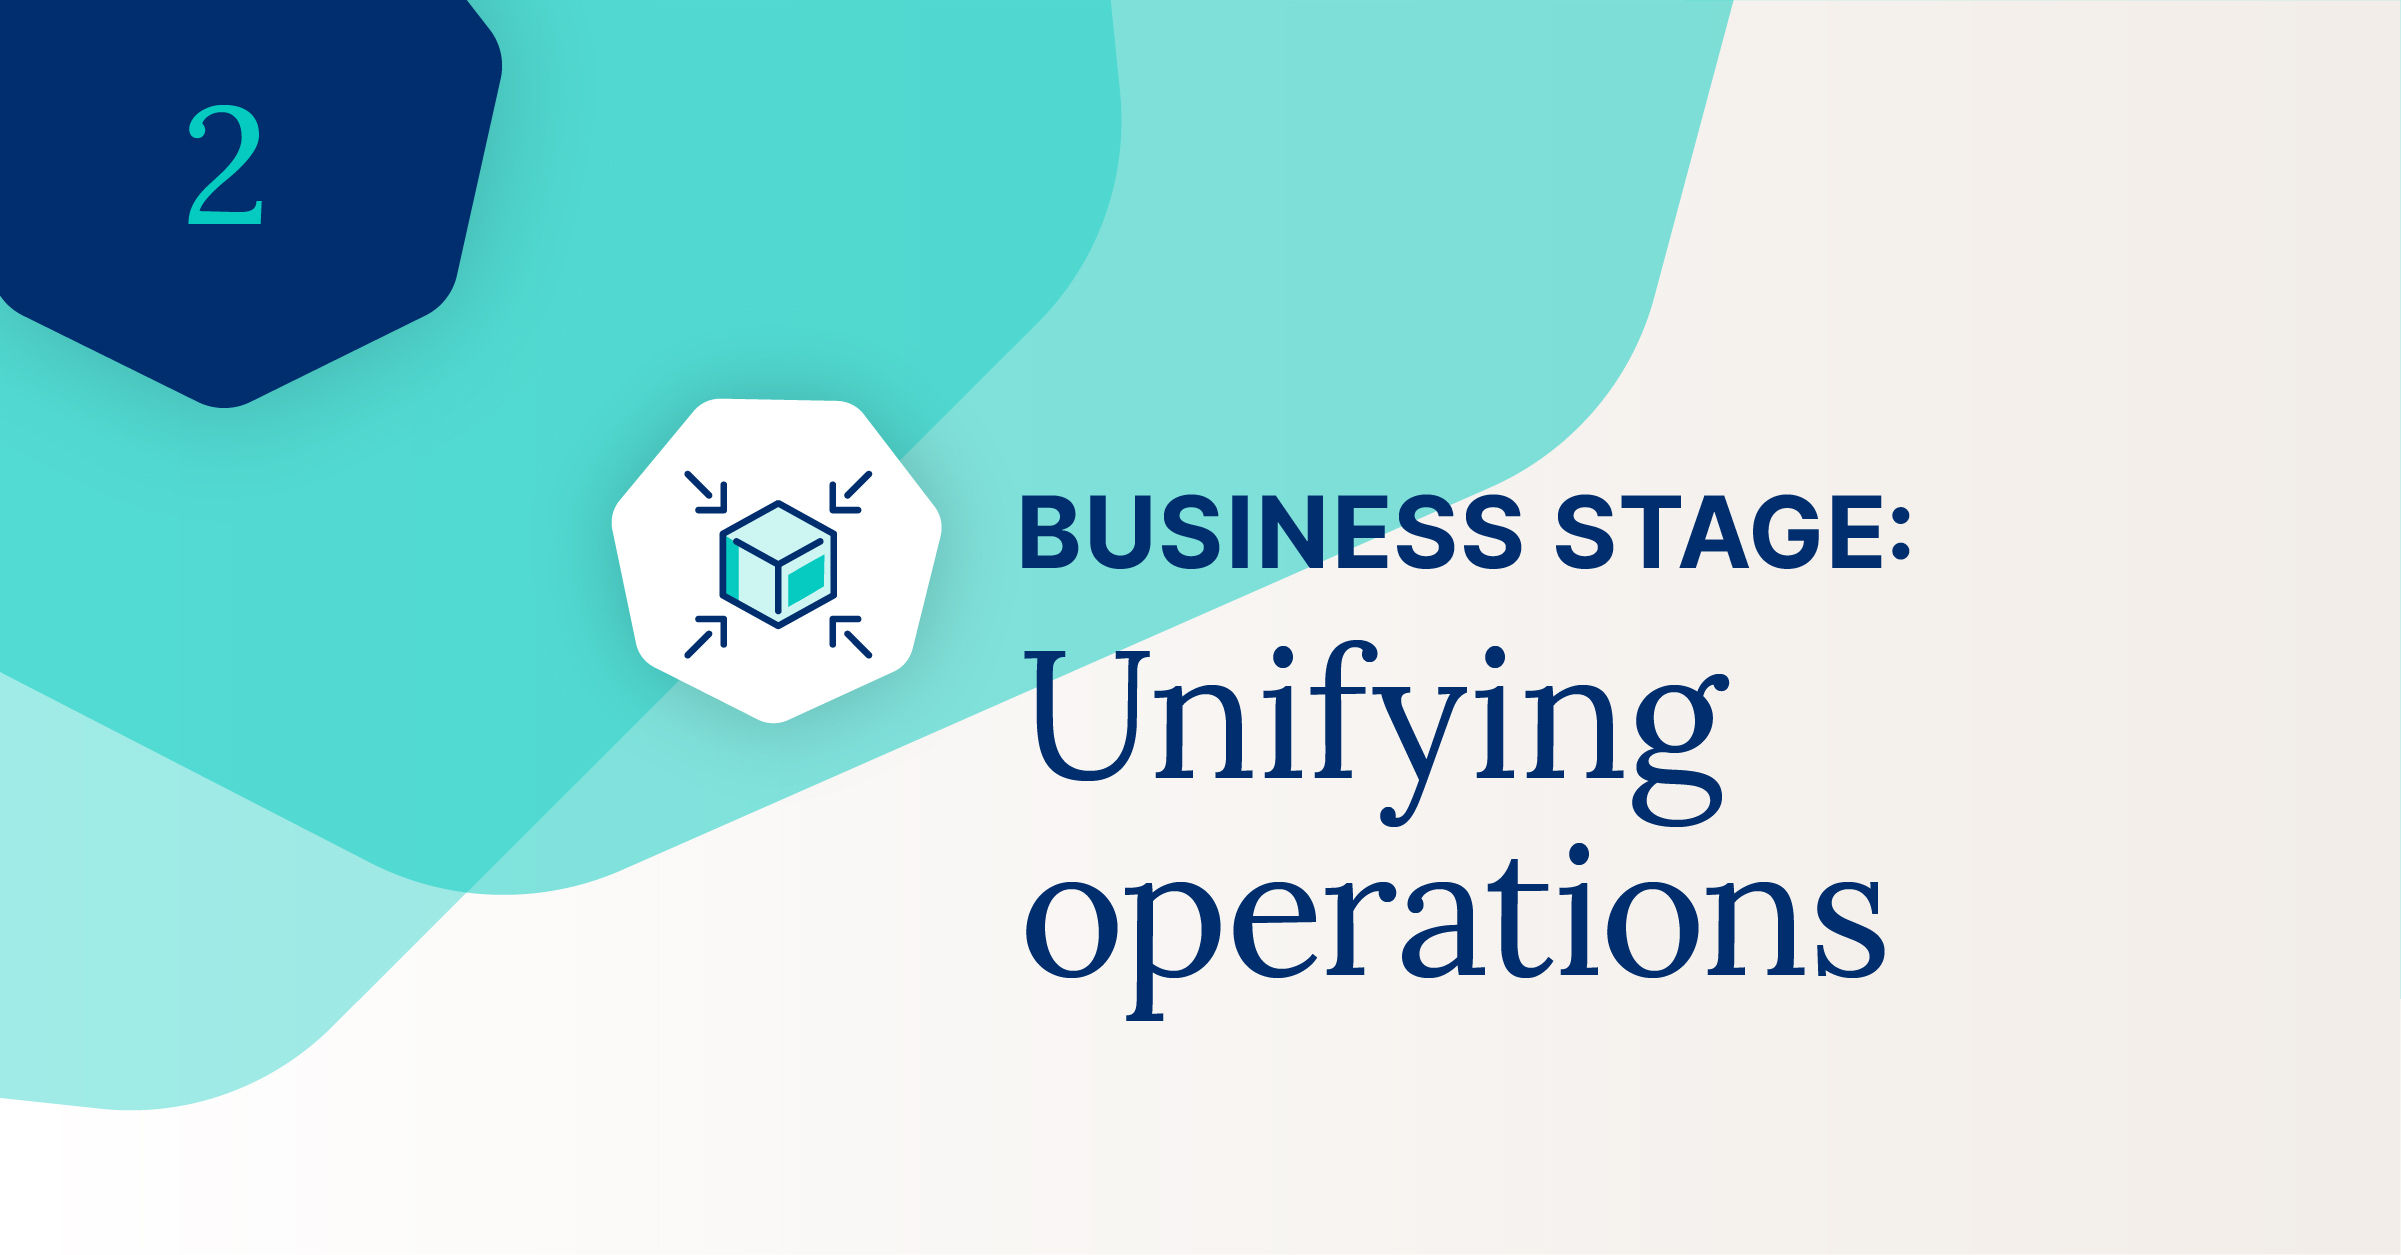 How to navigate the Unifying Operations stage of business growth